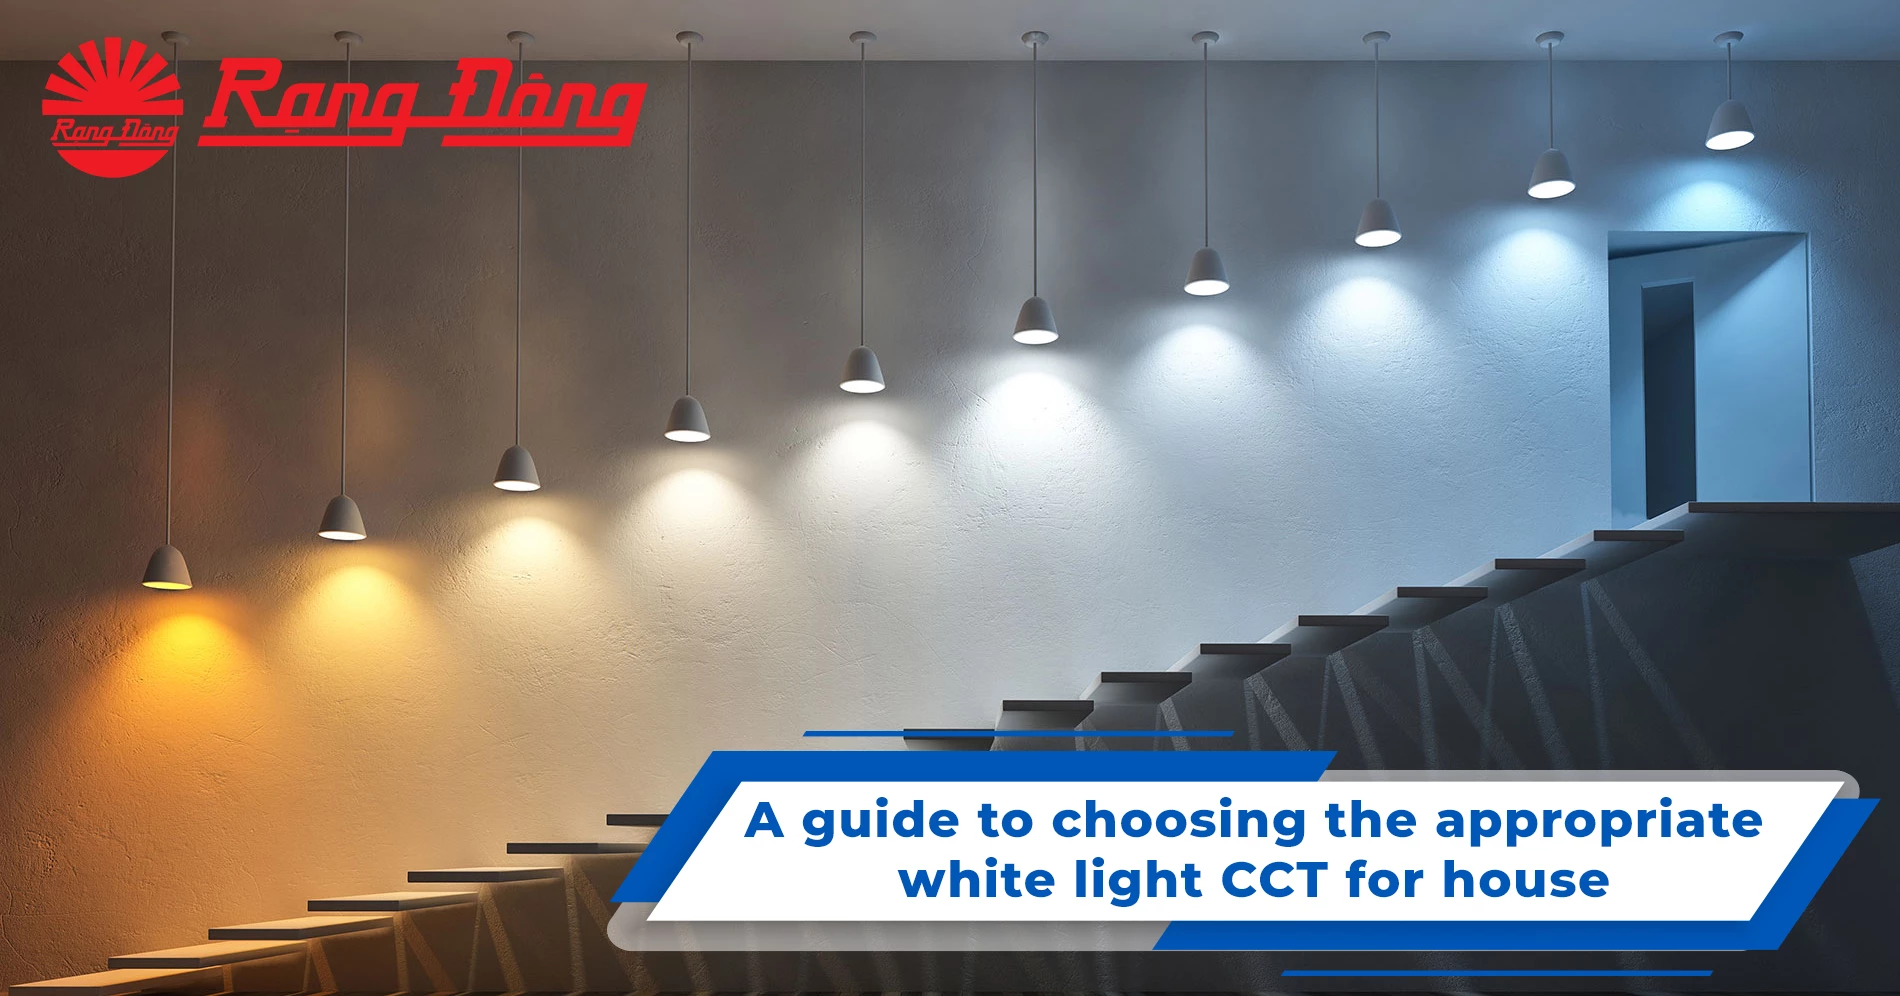 Guide on choosing appropriate white light for our home